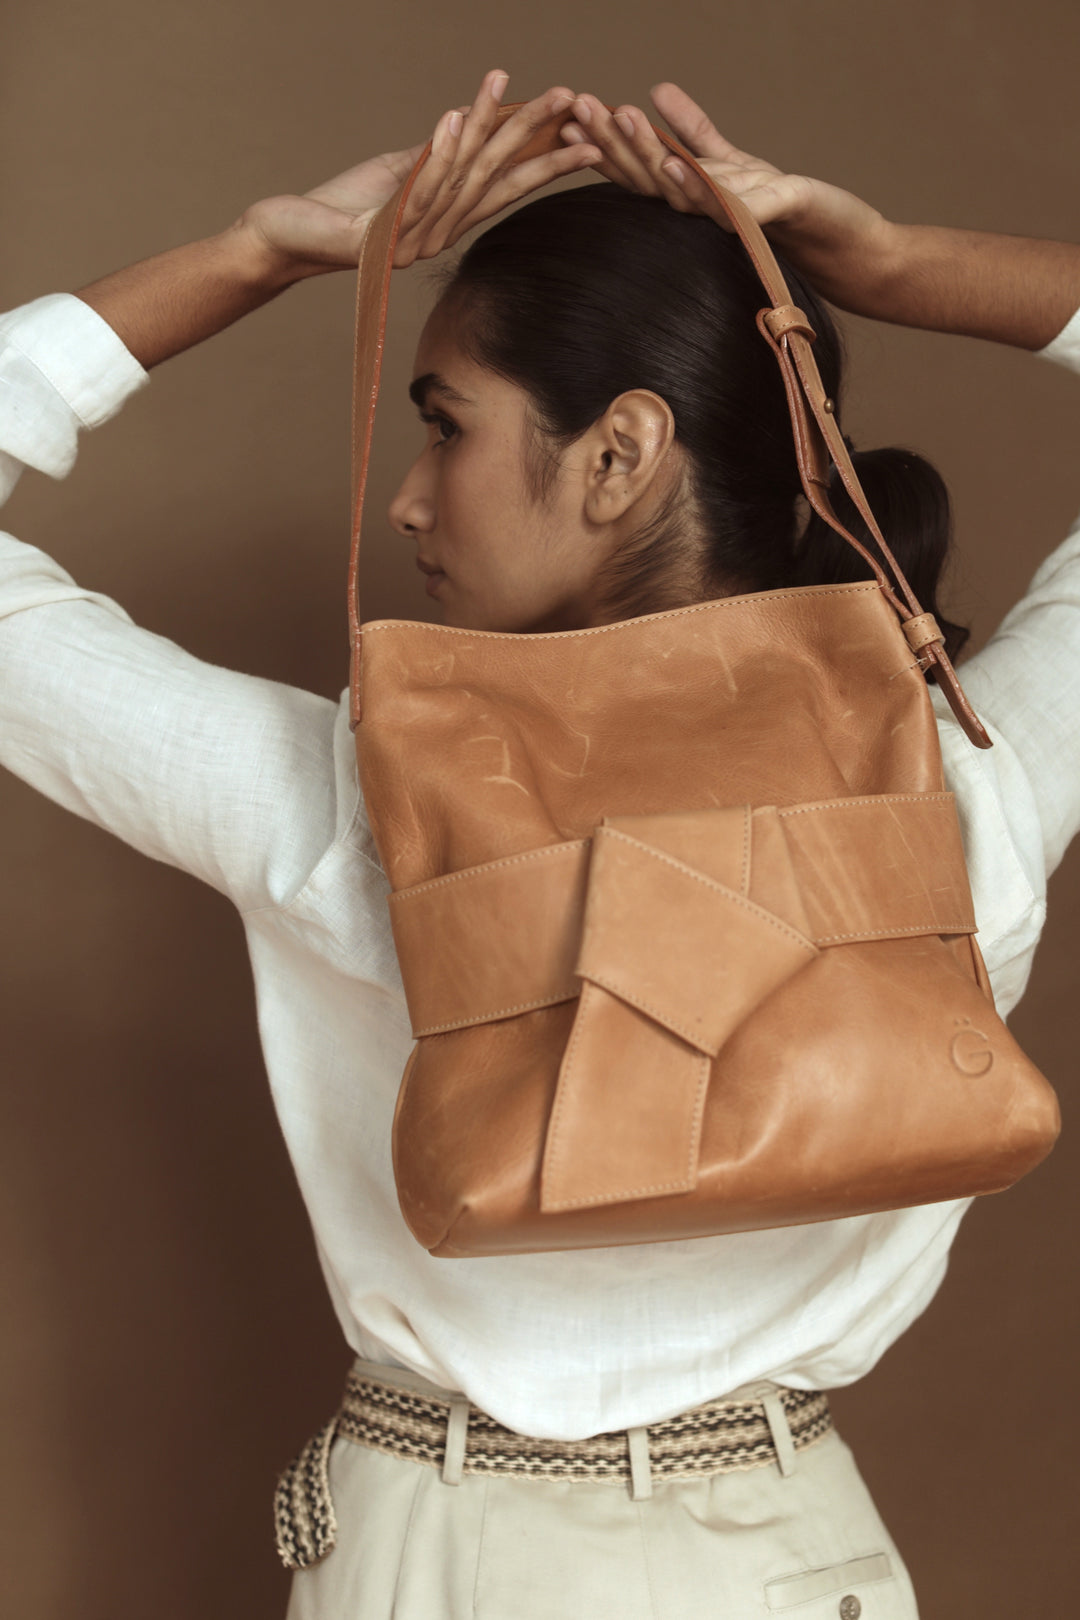 Hand Matters. Caramel brown leather purse. Exquisite leather from Argentina